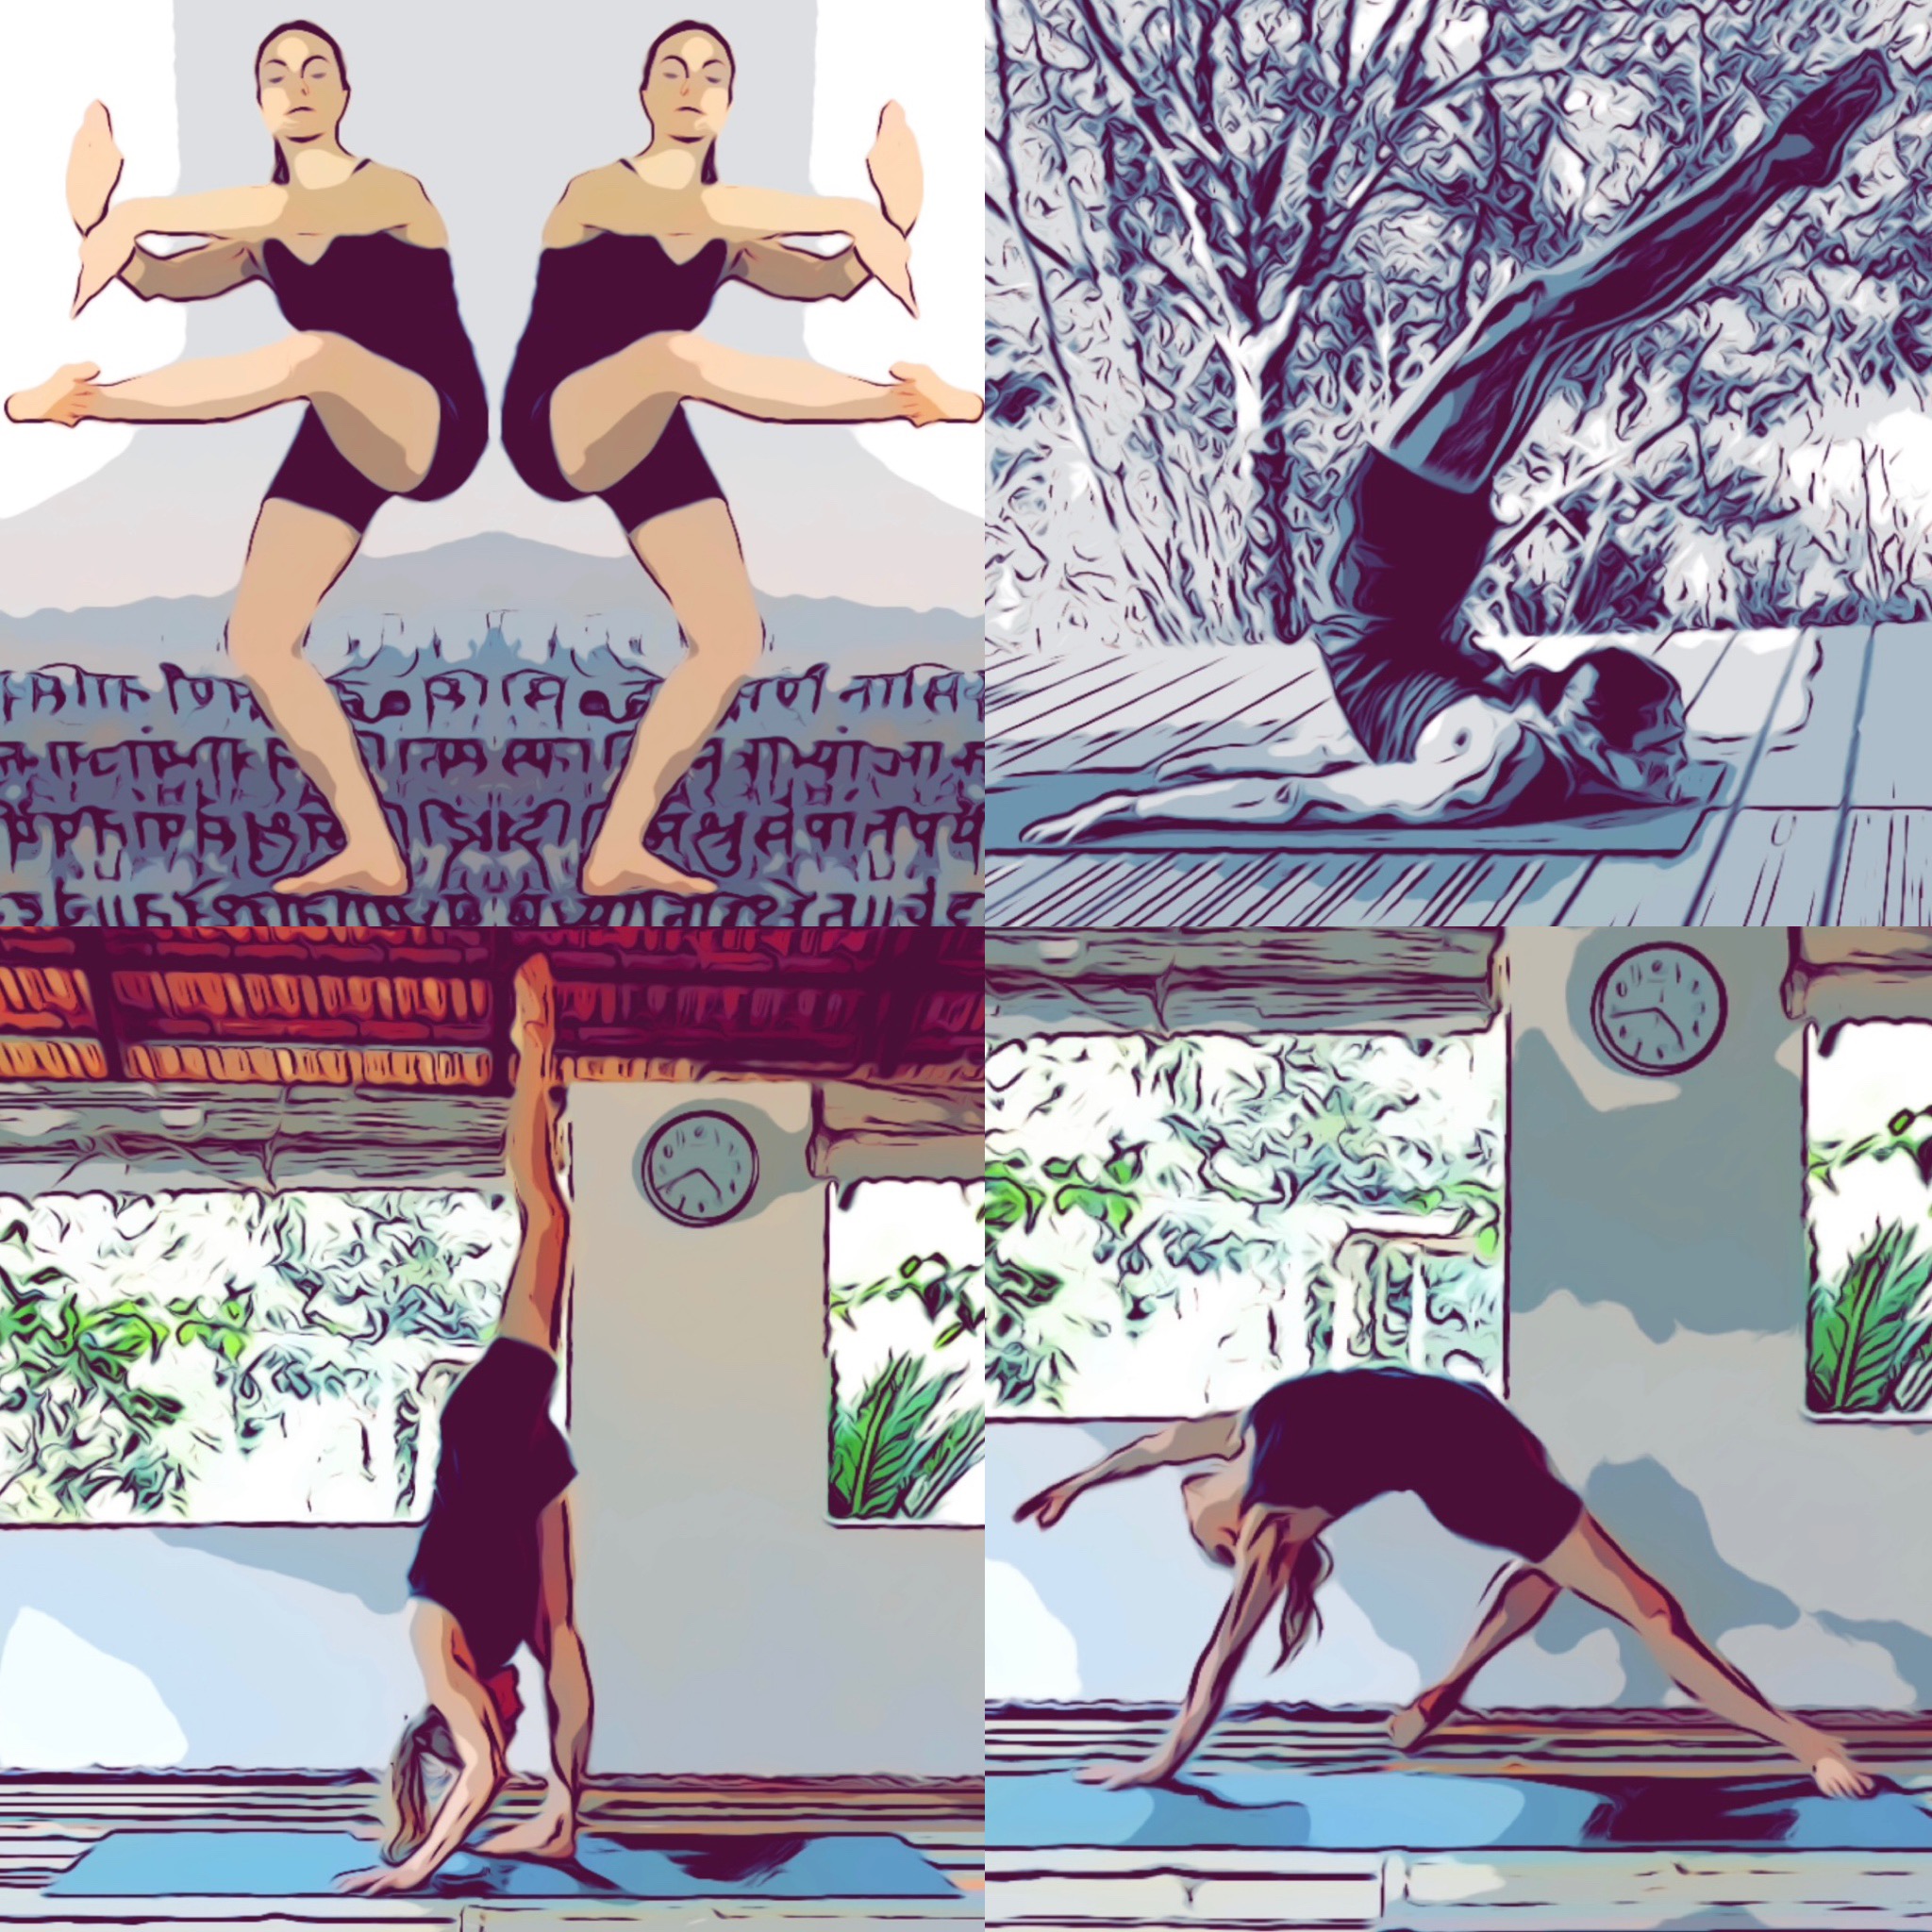 Memories of an ashtangi and her pregnancy